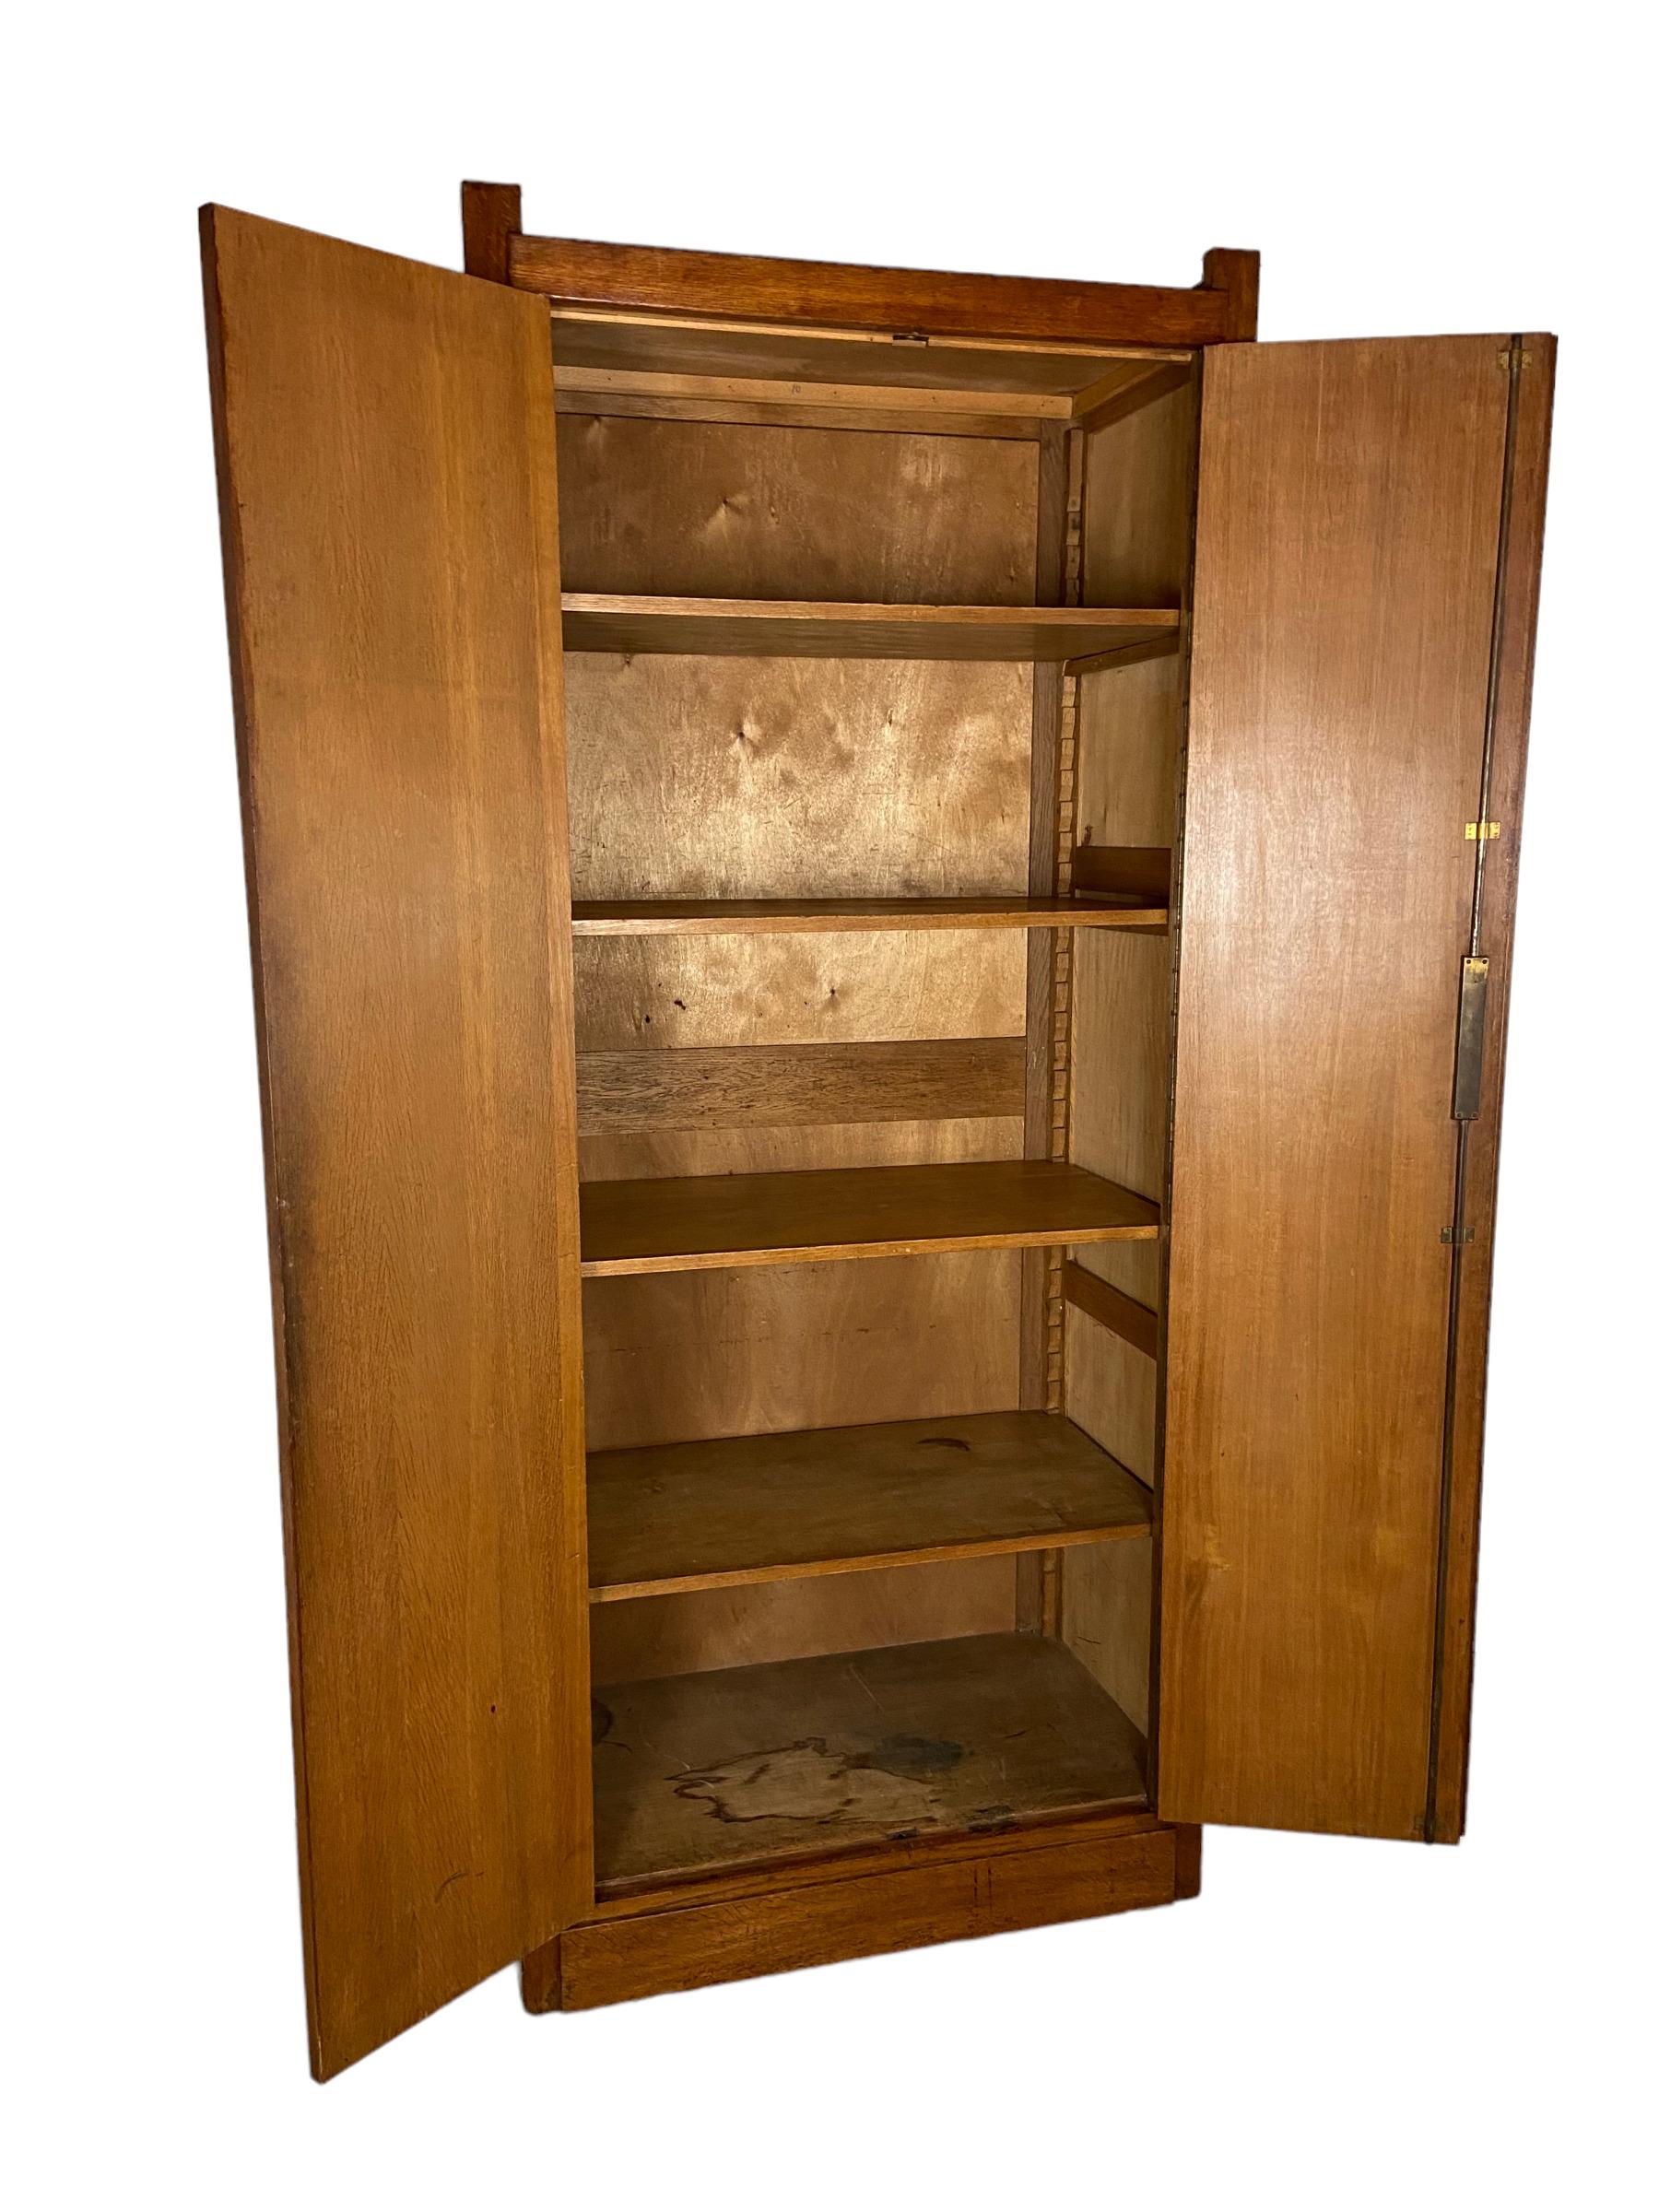 Rare modernist cupboard made of oak wood in The Netherlands in the 1920s. This high cabinet was used in a post office in the 1920s and 1930s. The 4 shelves are adjustable. The lock works good. This vintage object is in a good condition but it shows